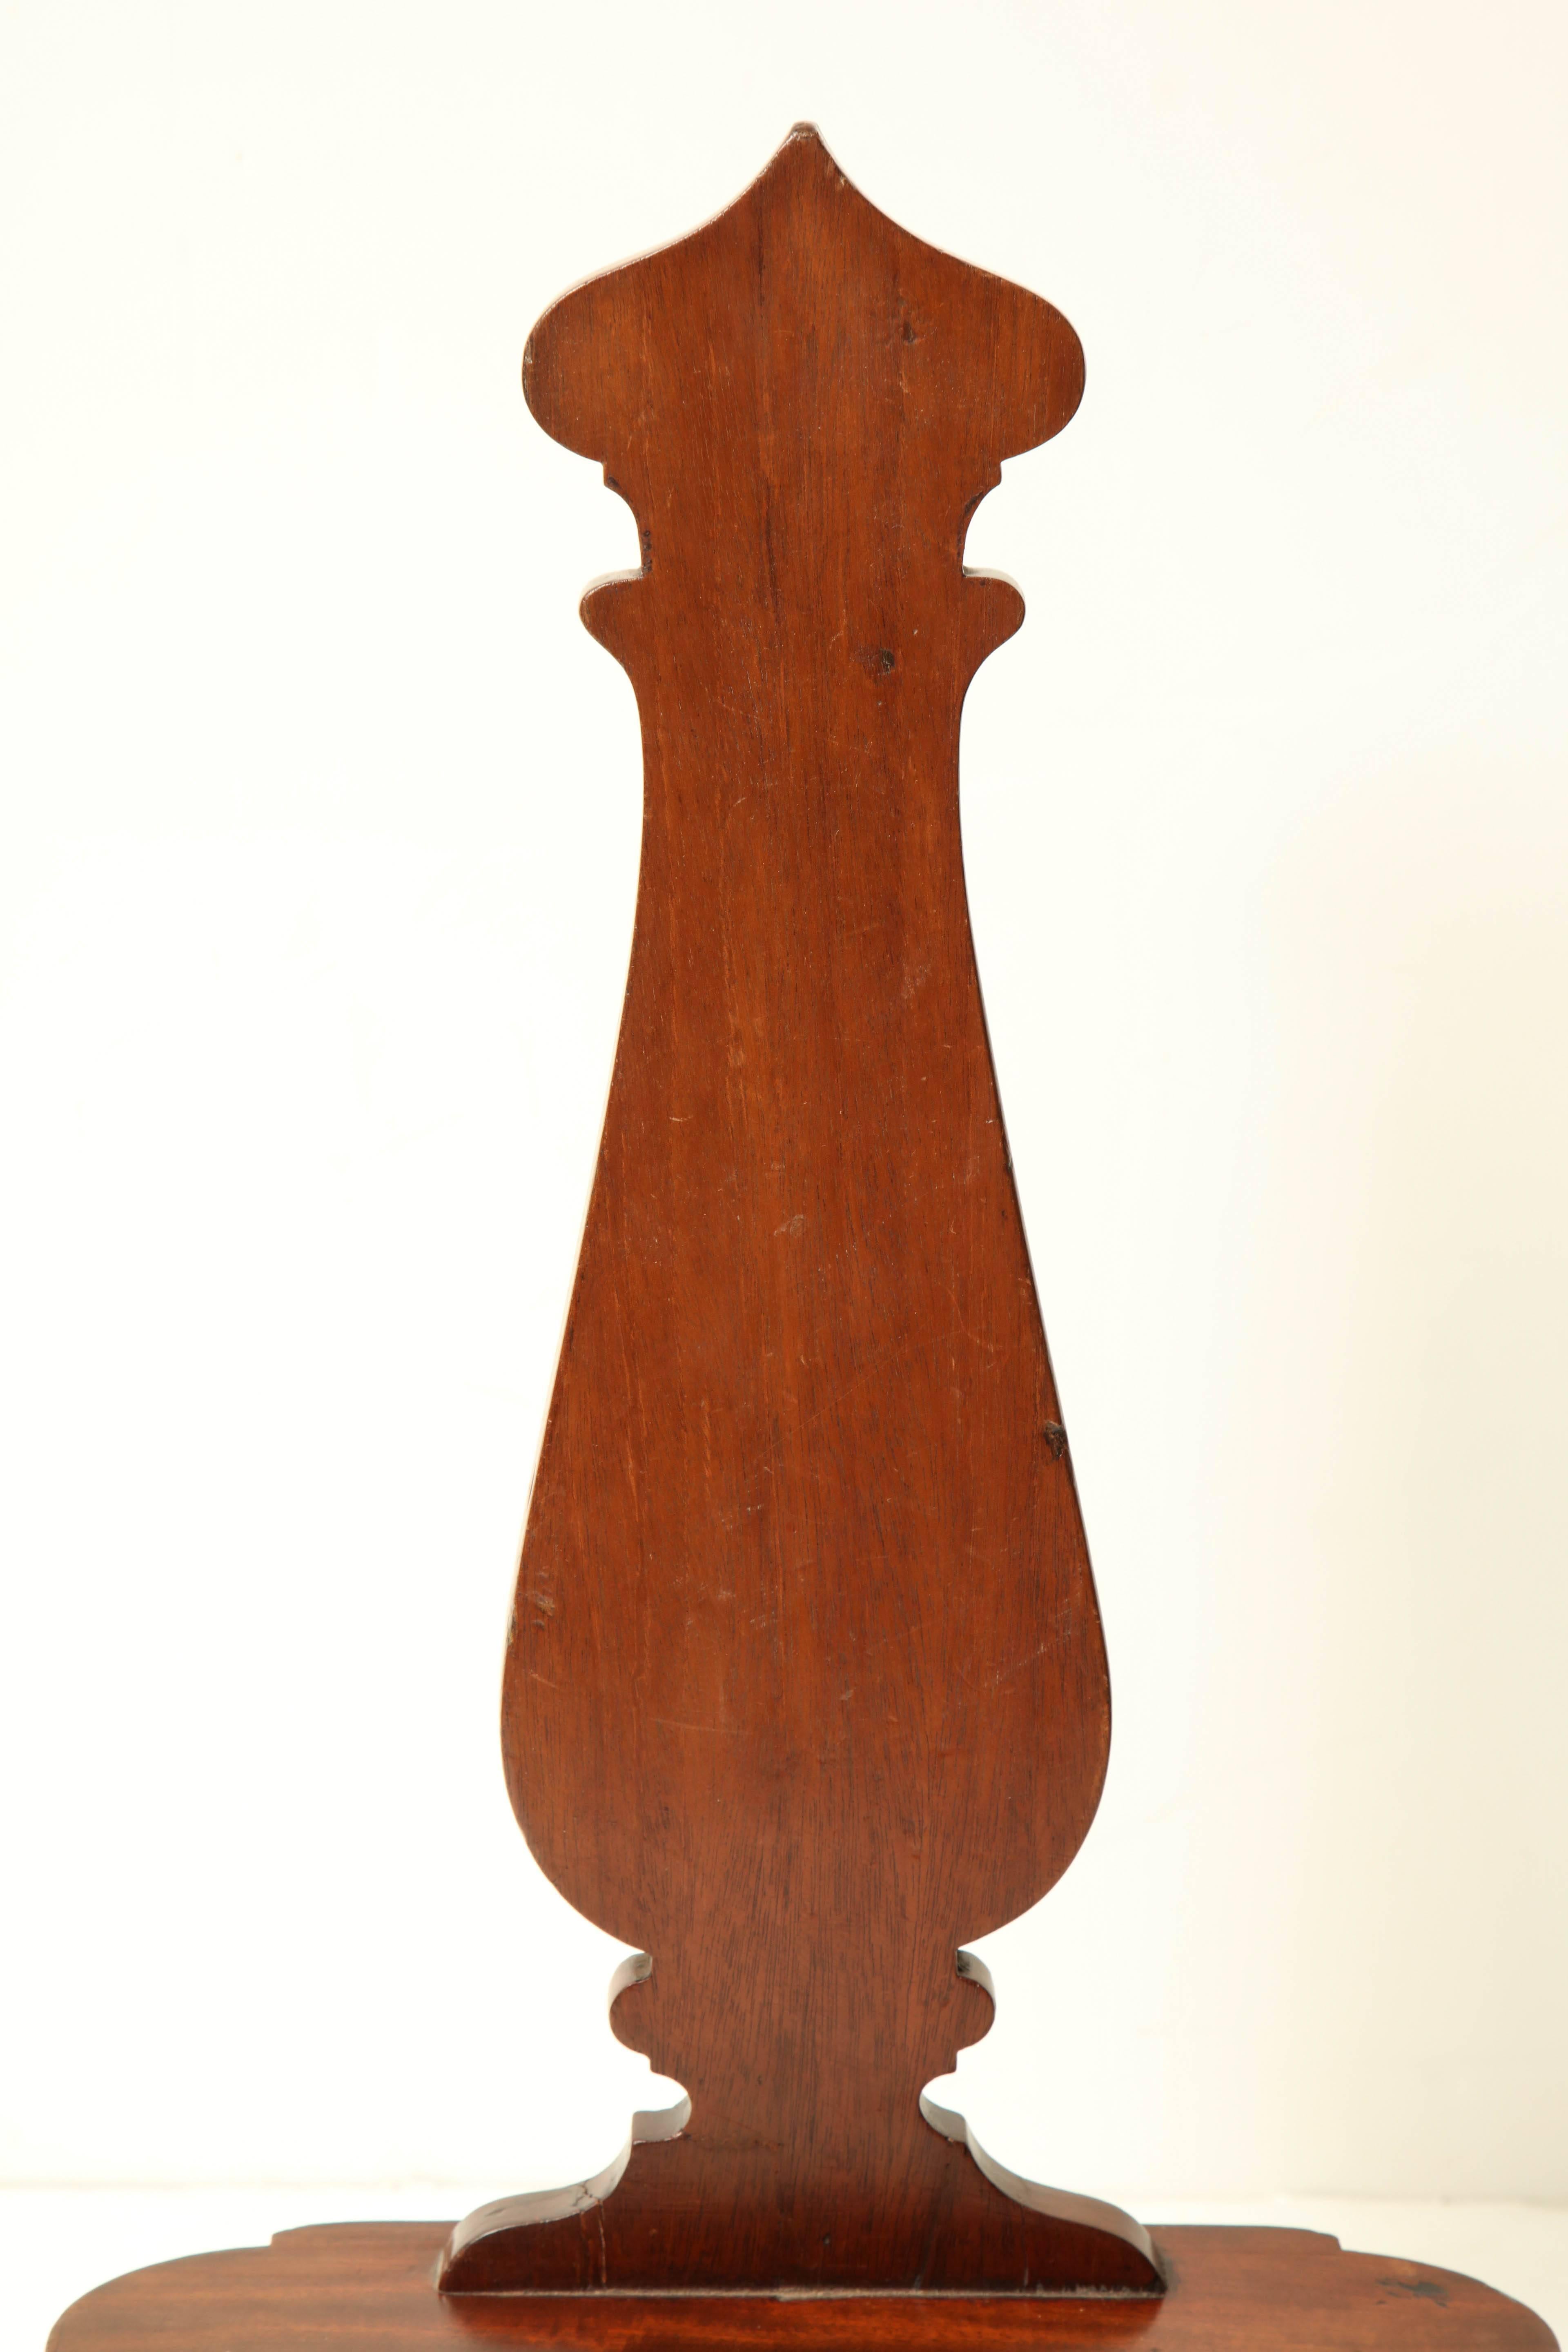 Mid-19th Century English, Mahogany, Weighted Charger [plate] Stand or Rack